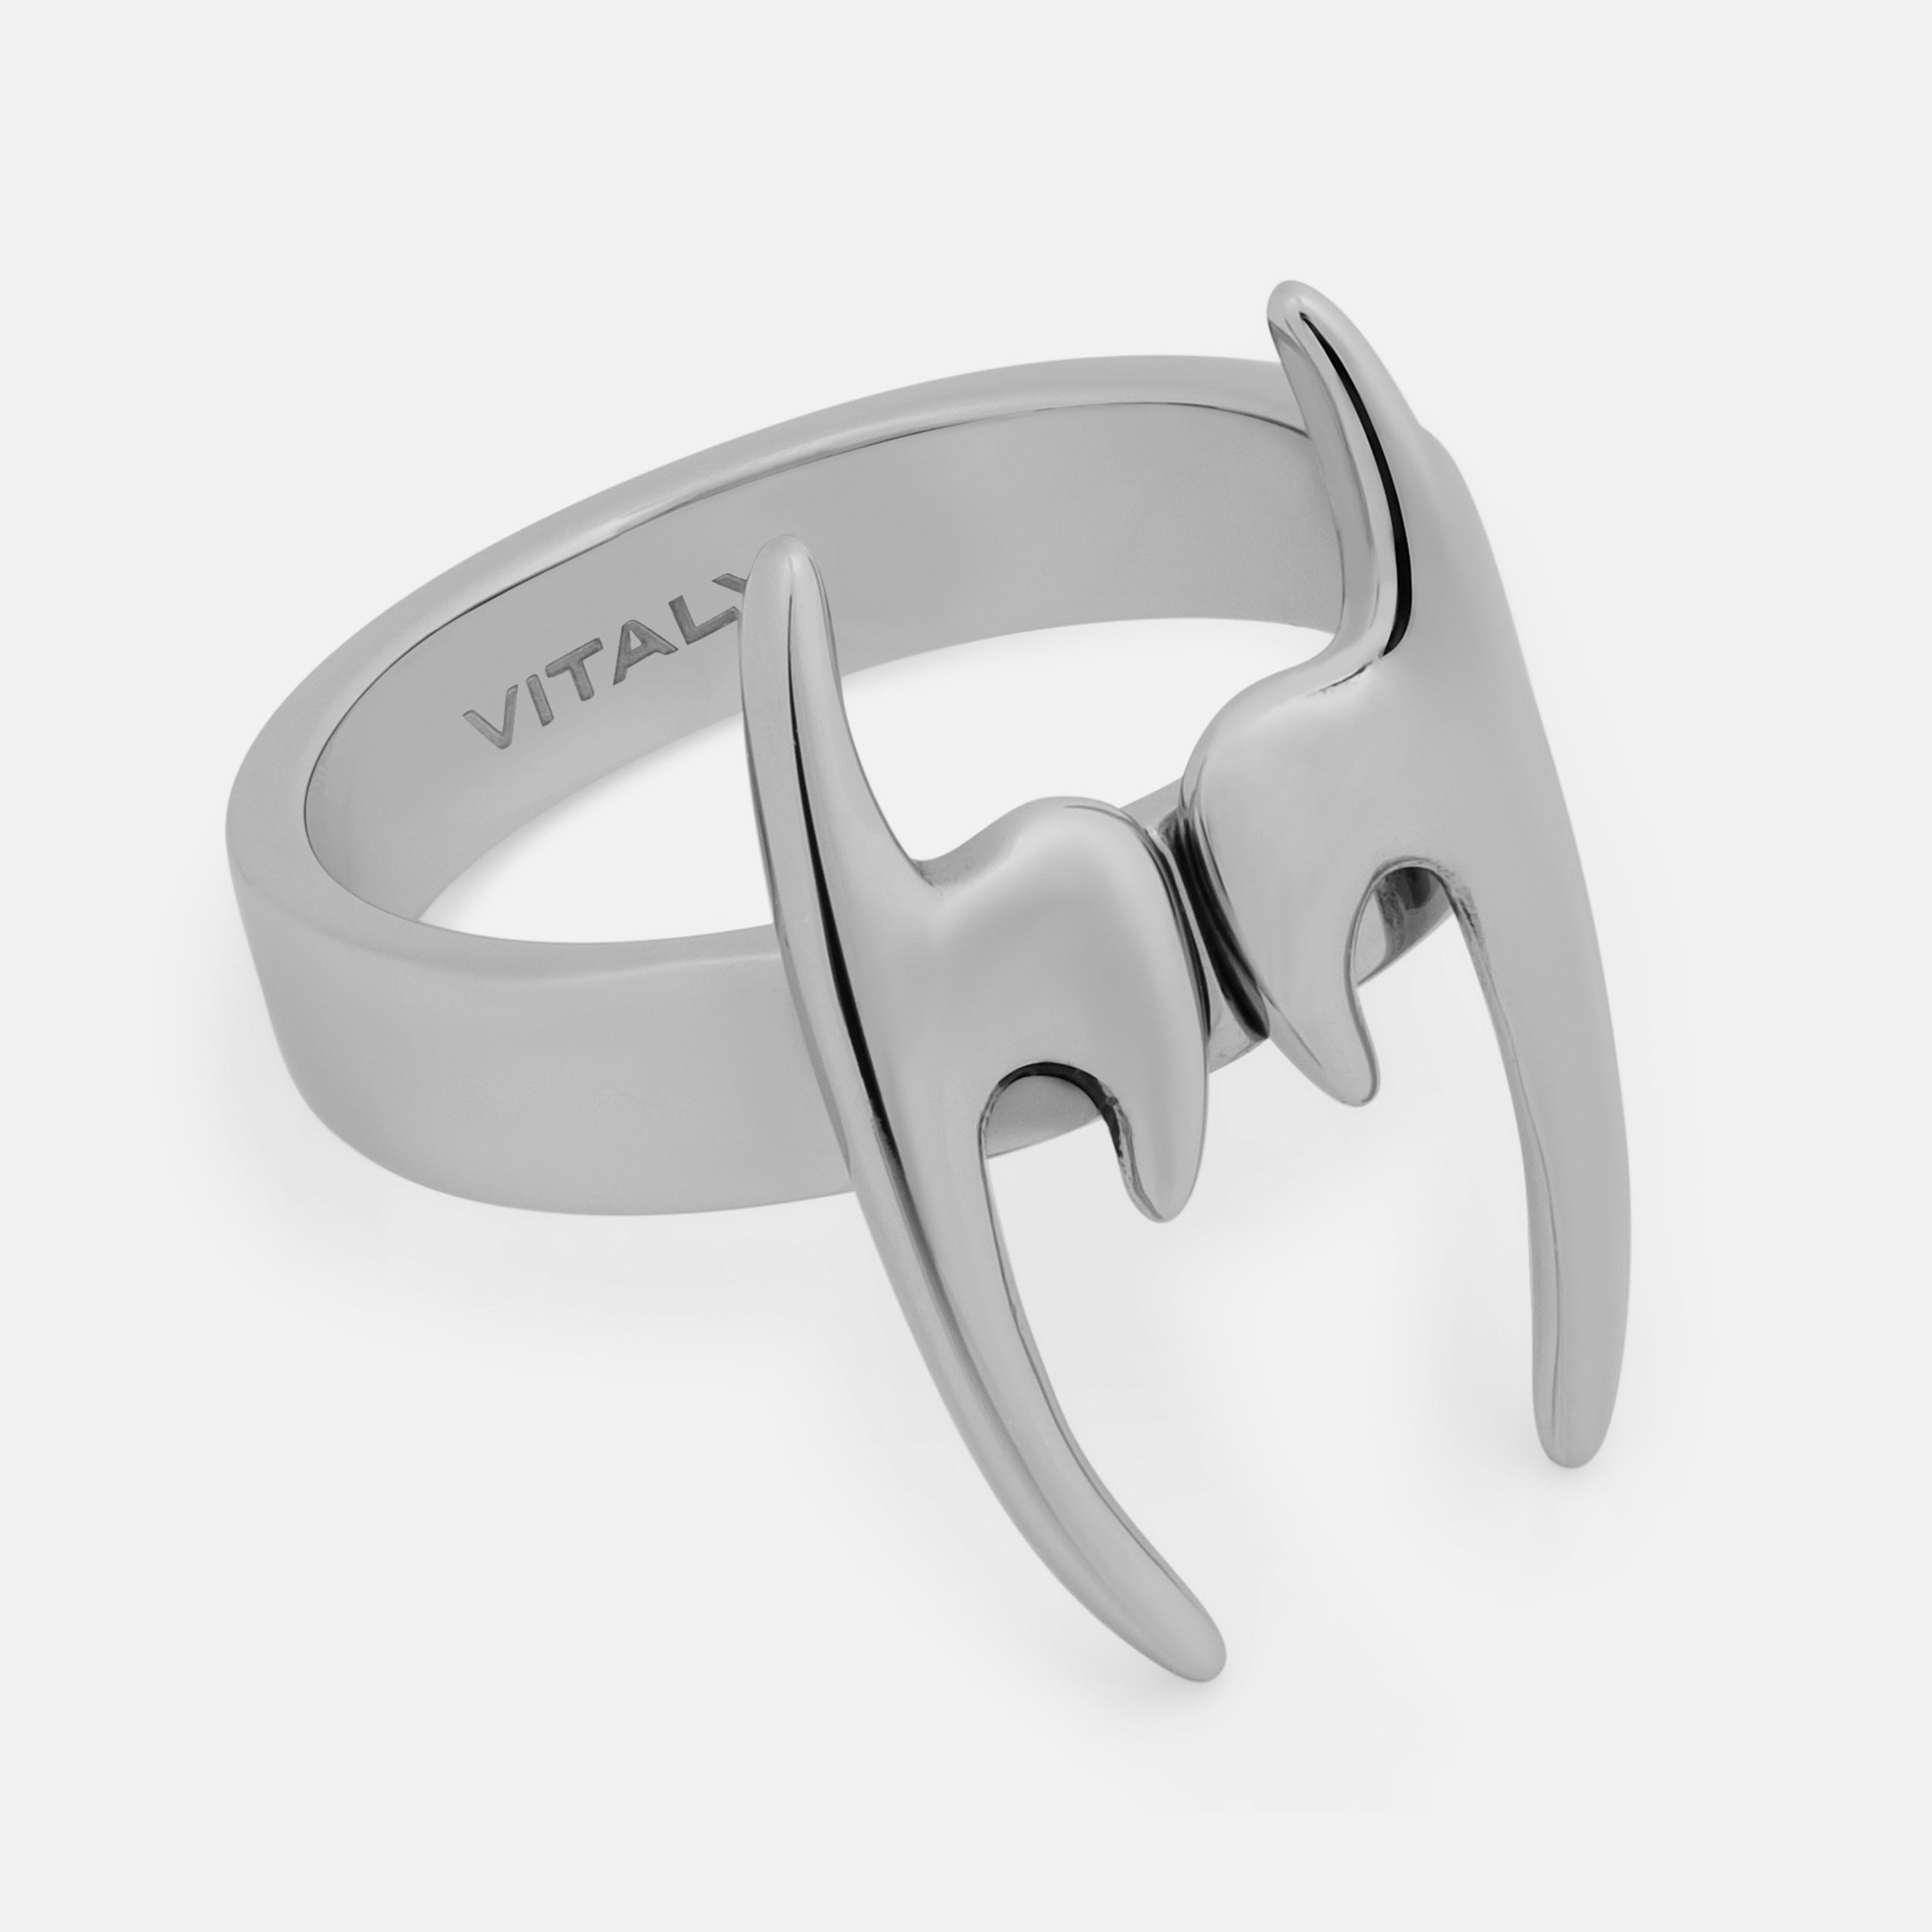 Vitaly, Stainless Steel Accessories